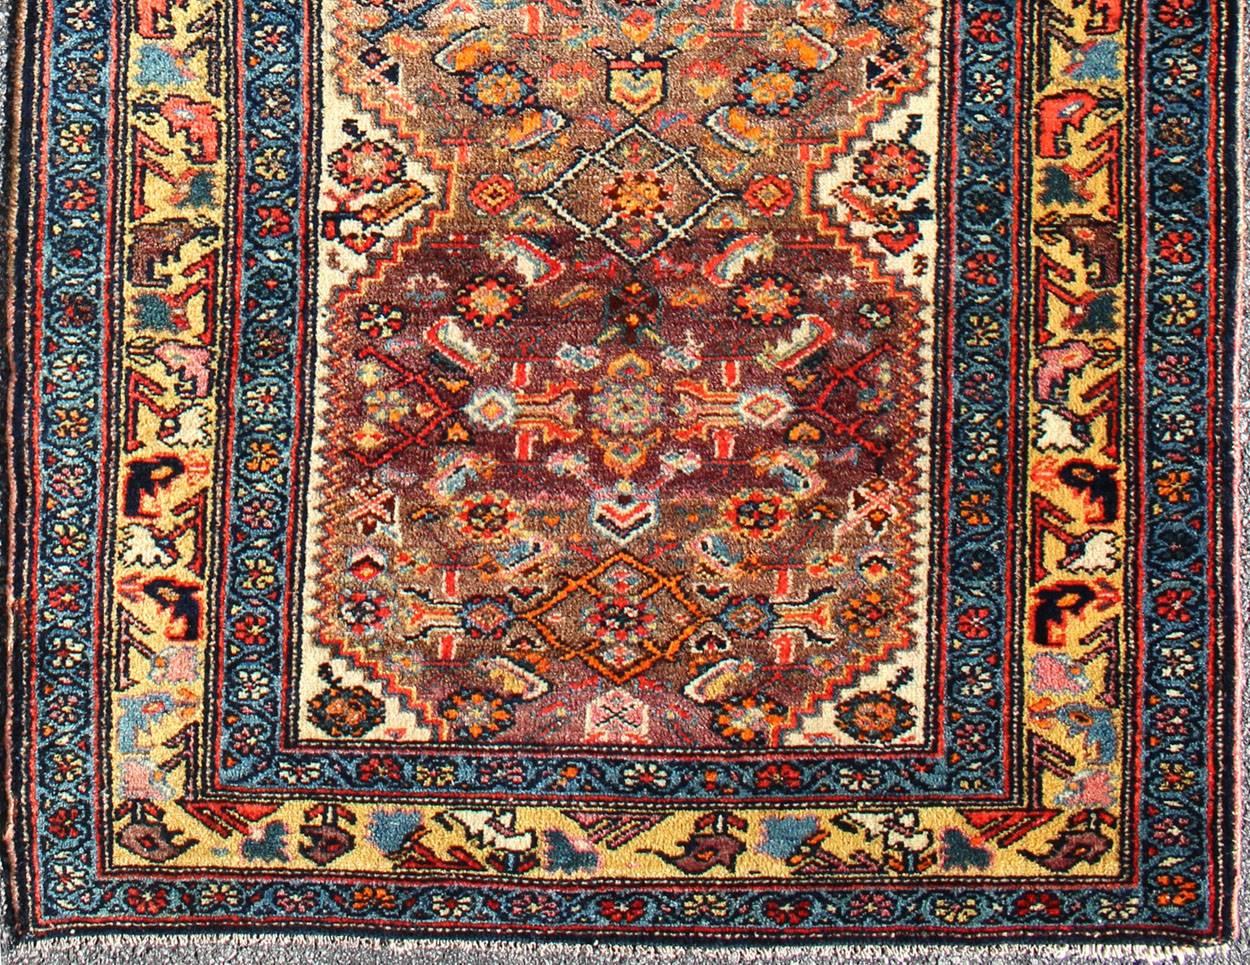 Antique Persian Fine Persian Malayer Short Runner in Great Condition , 16-0920, This colorful piece features a gradient coral and purple field decorated with navy blue lattice work and stylized boteh and floral elements. A beautifully drawn